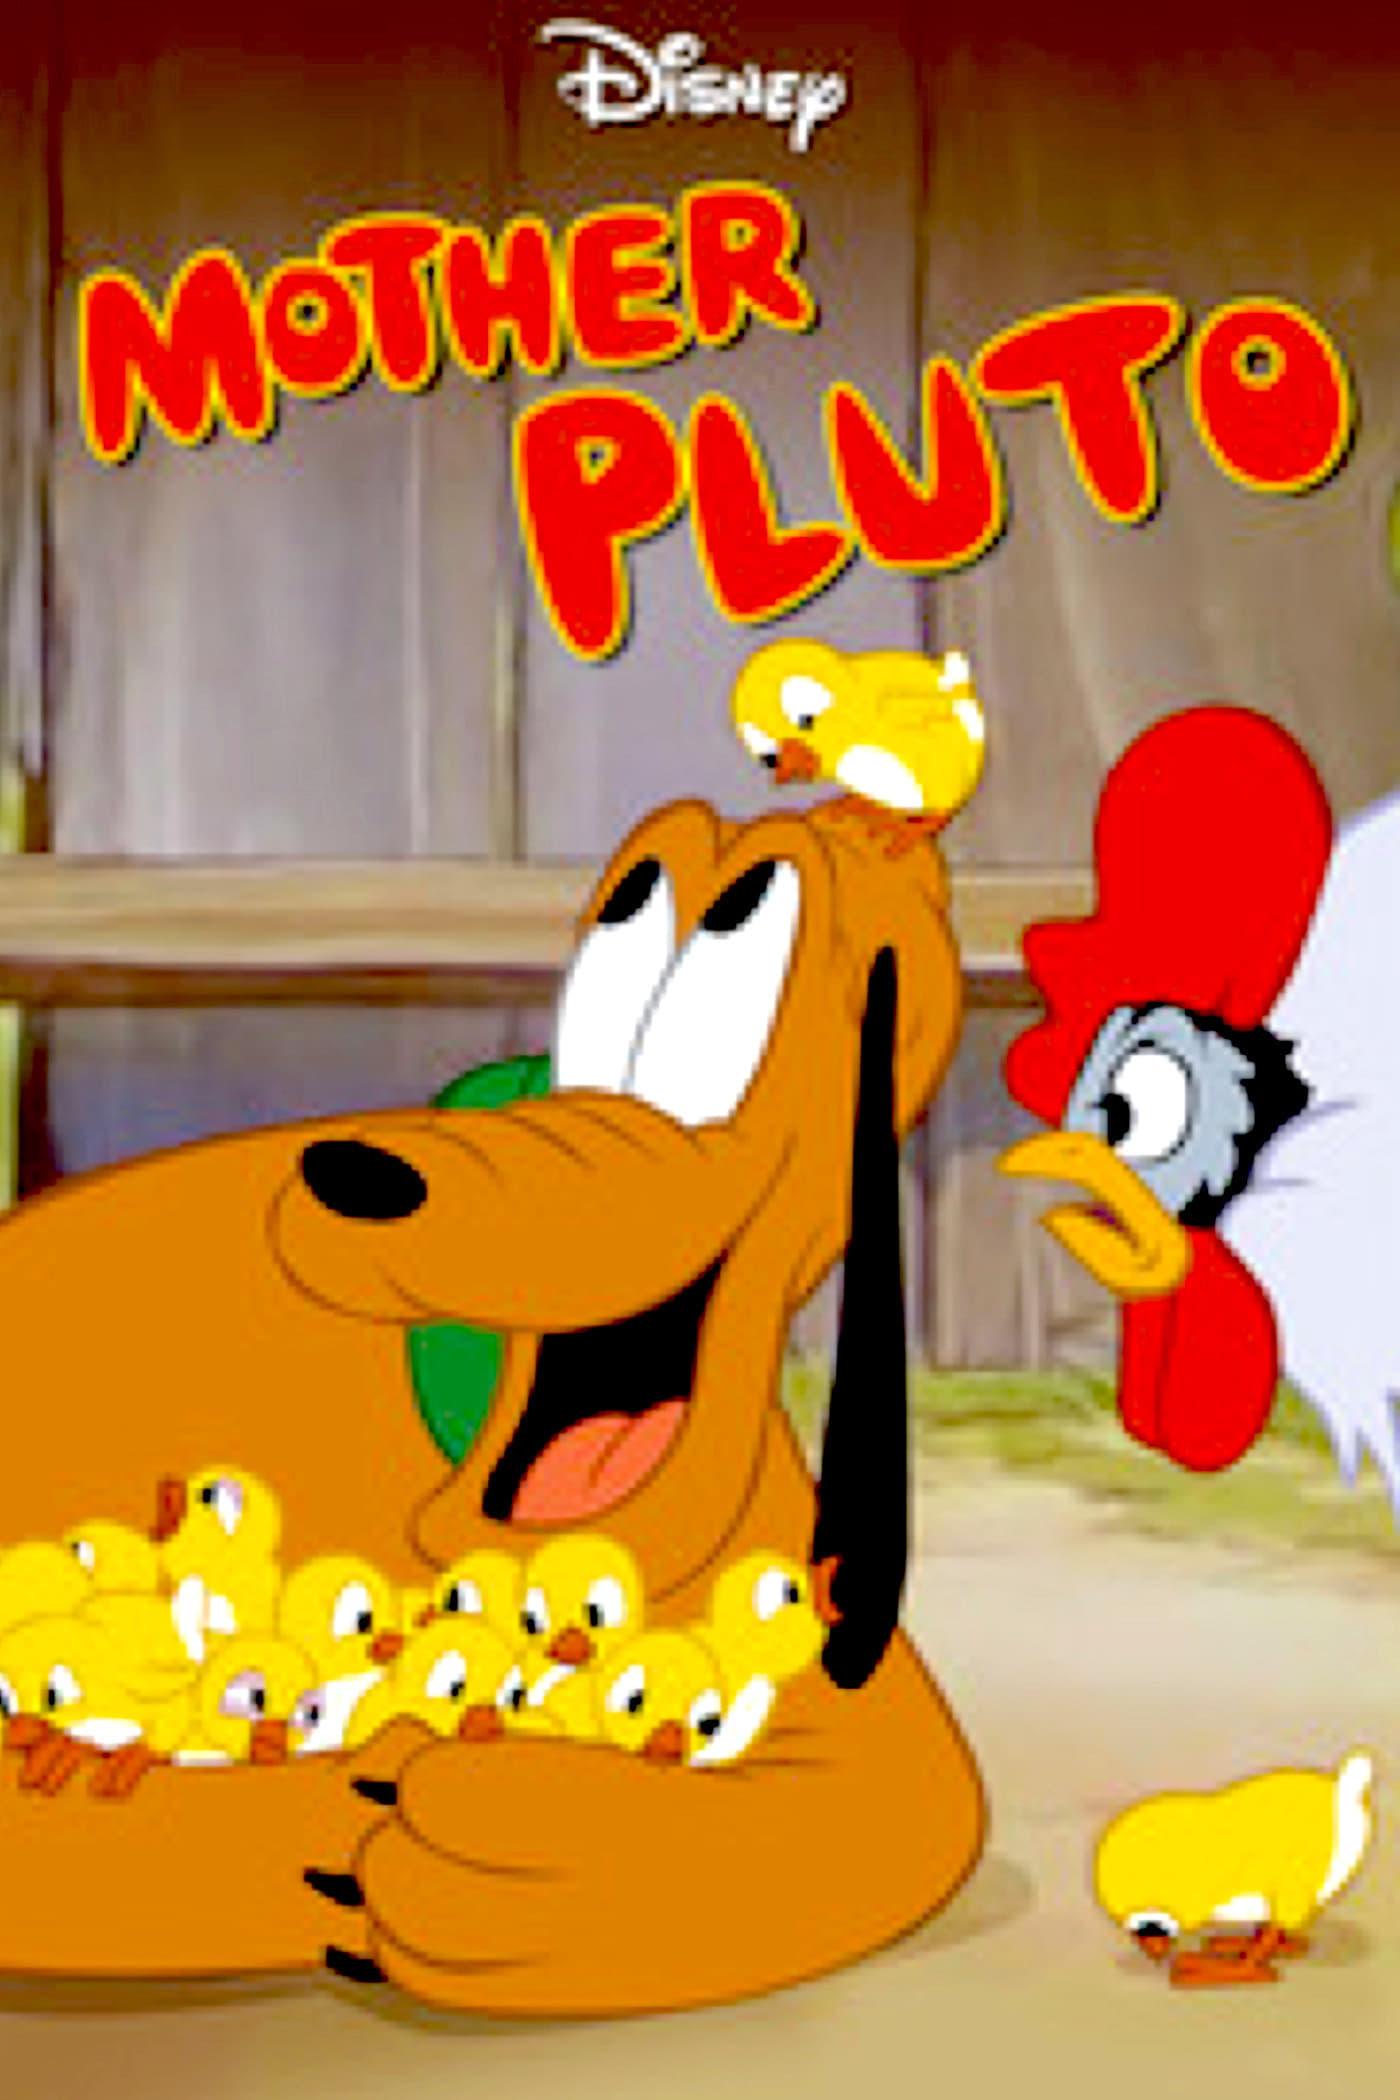 Mother Pluto poster